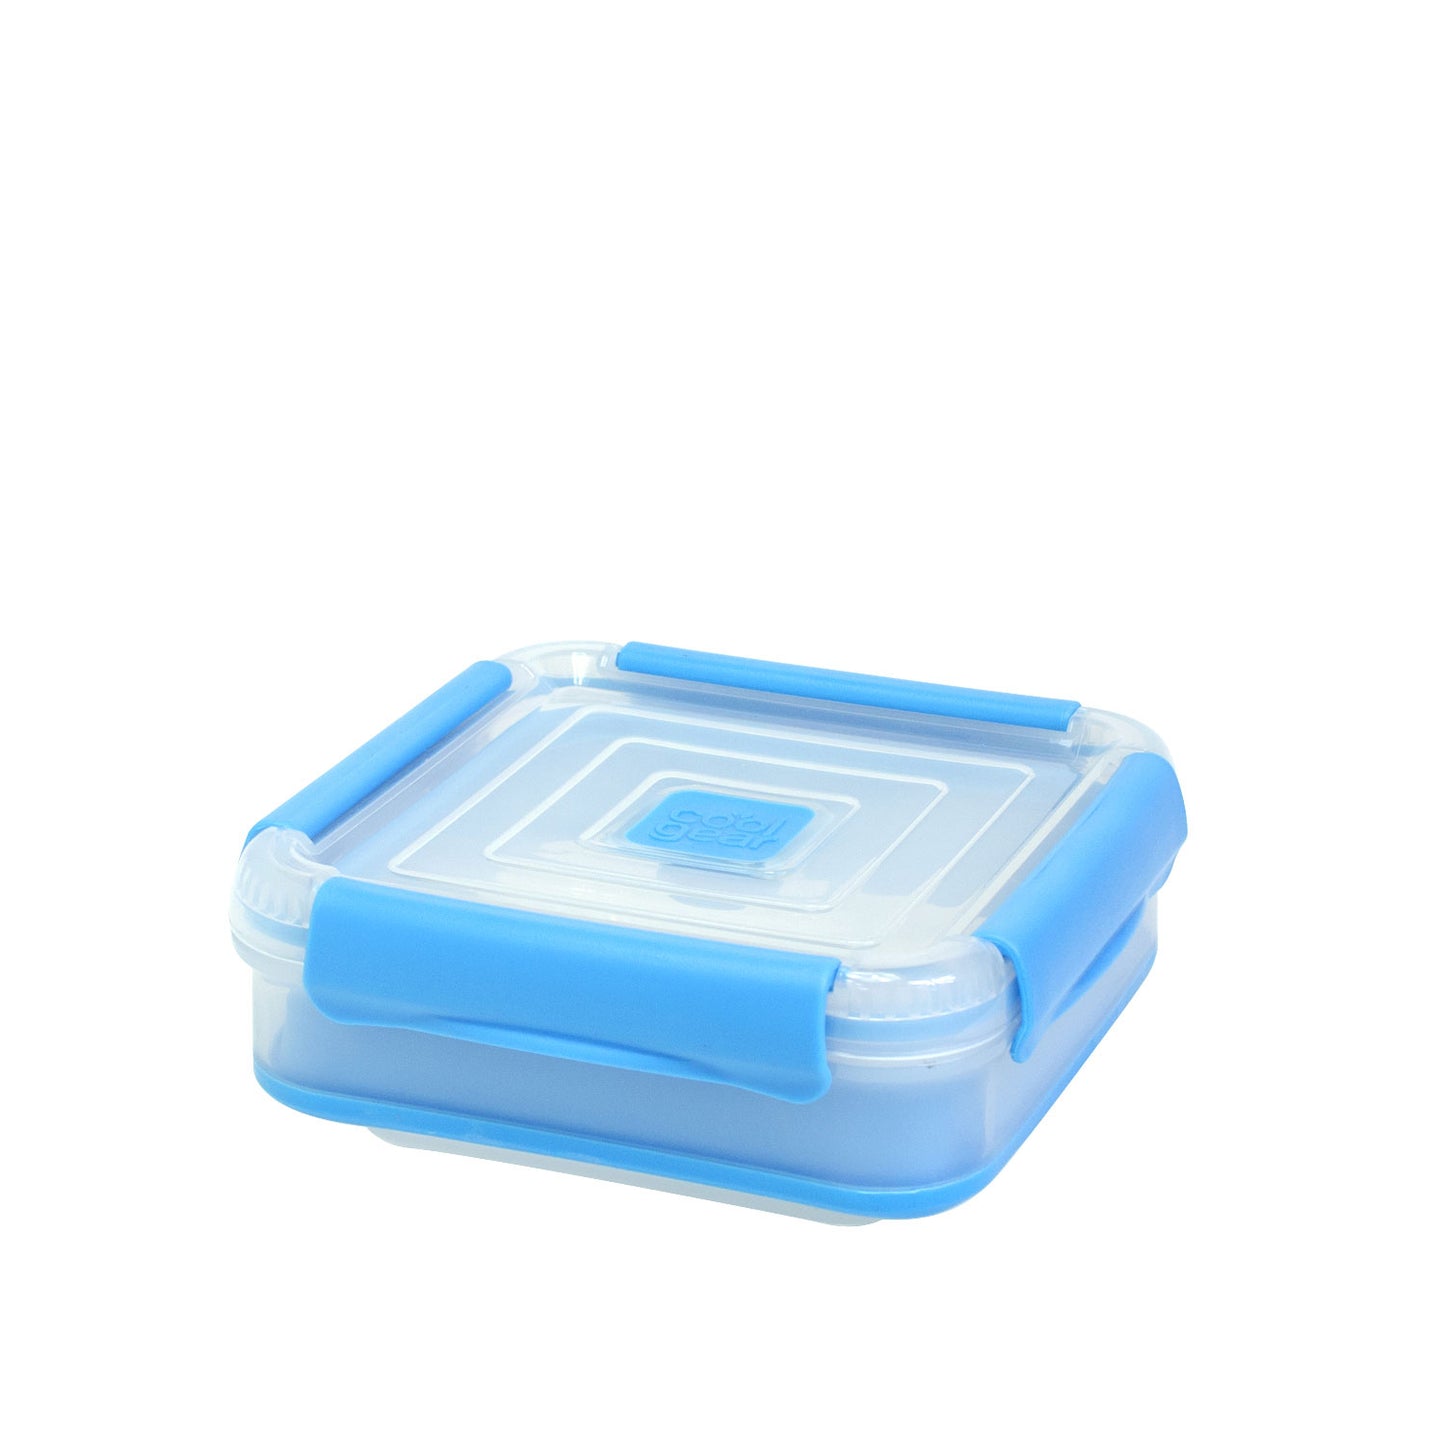 Cool Gear Air Tight Food Lunch Box Container 1.85 Cup BPA-Free 2-Pack